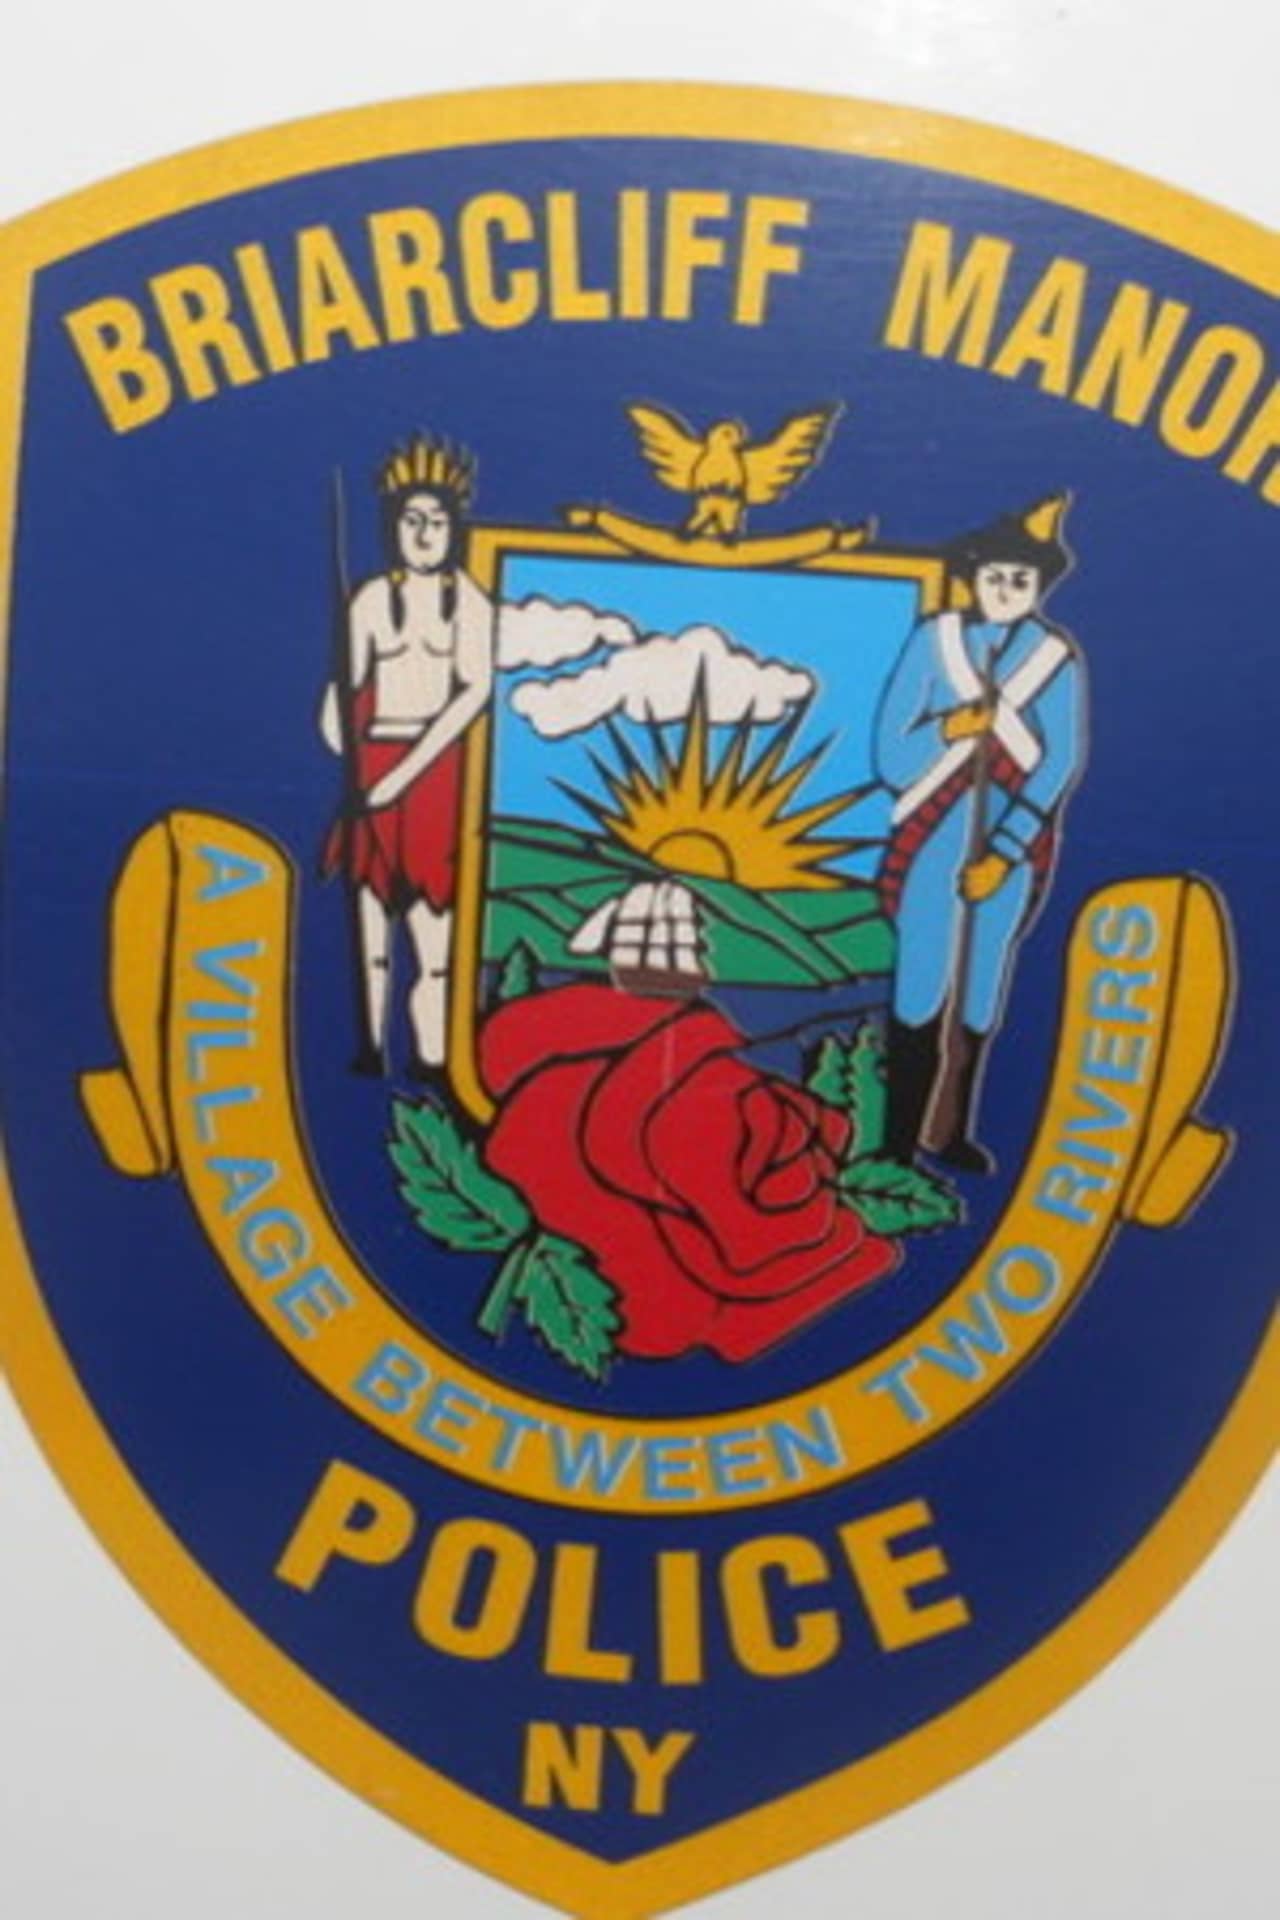 There were several minor fires and burglaries in Briarcliff Manor over the week of Thanksgiving. 